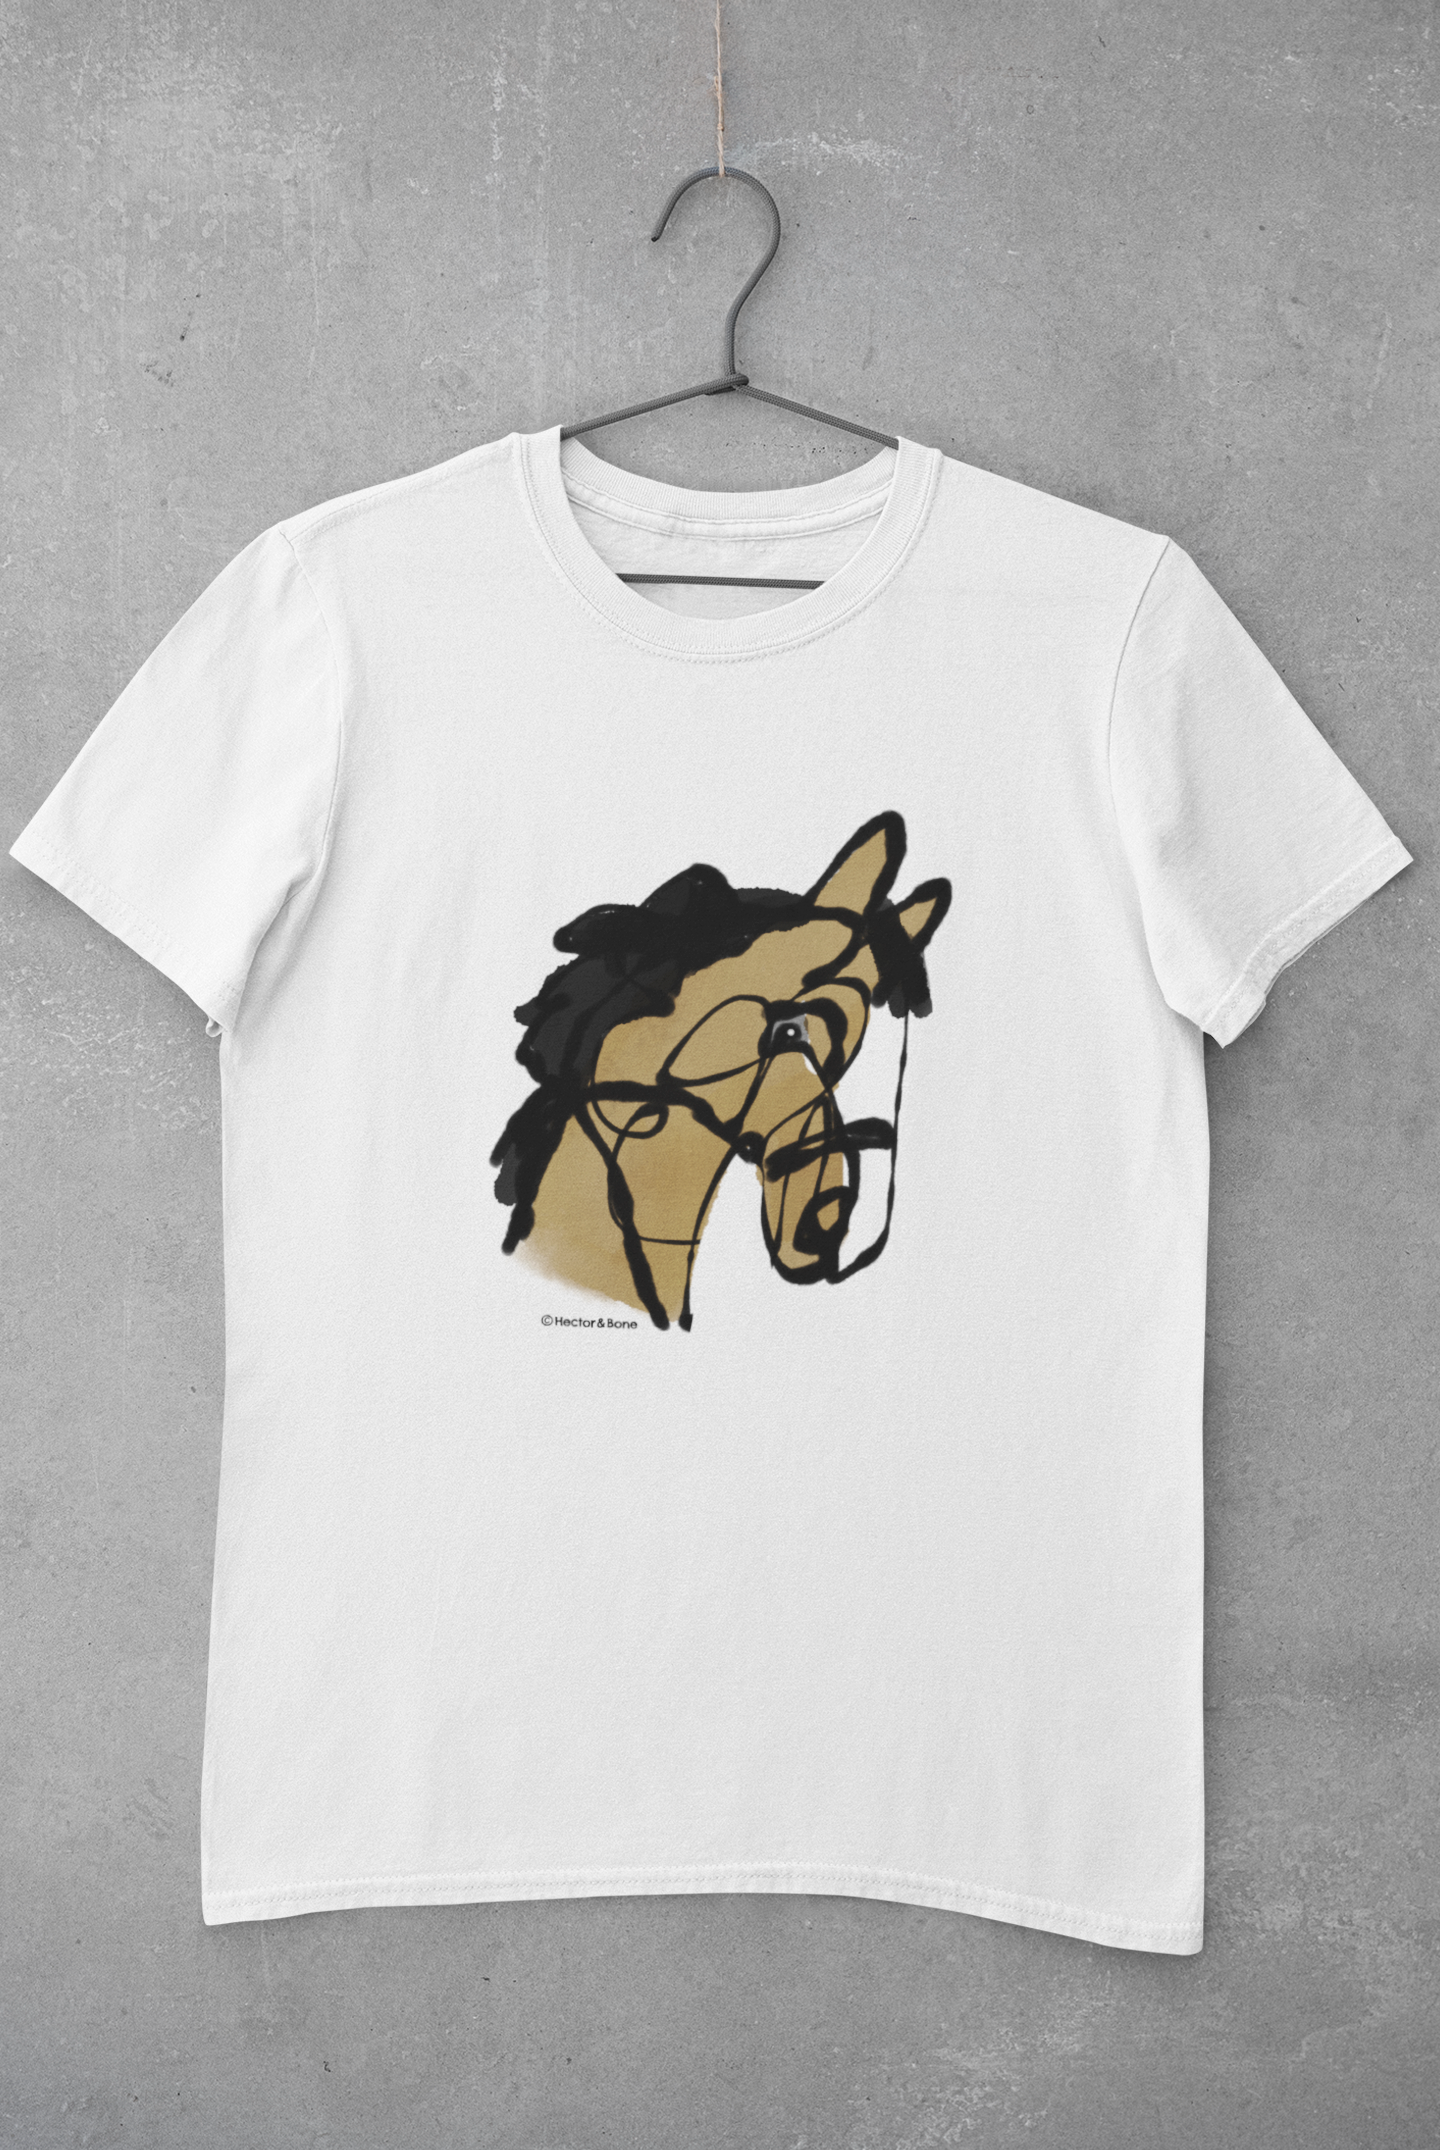 Horse T-shirt - Illustrated I love my horse t-shirt design printed on a white vegan cotton horse head t-shirt by Hector and Bone